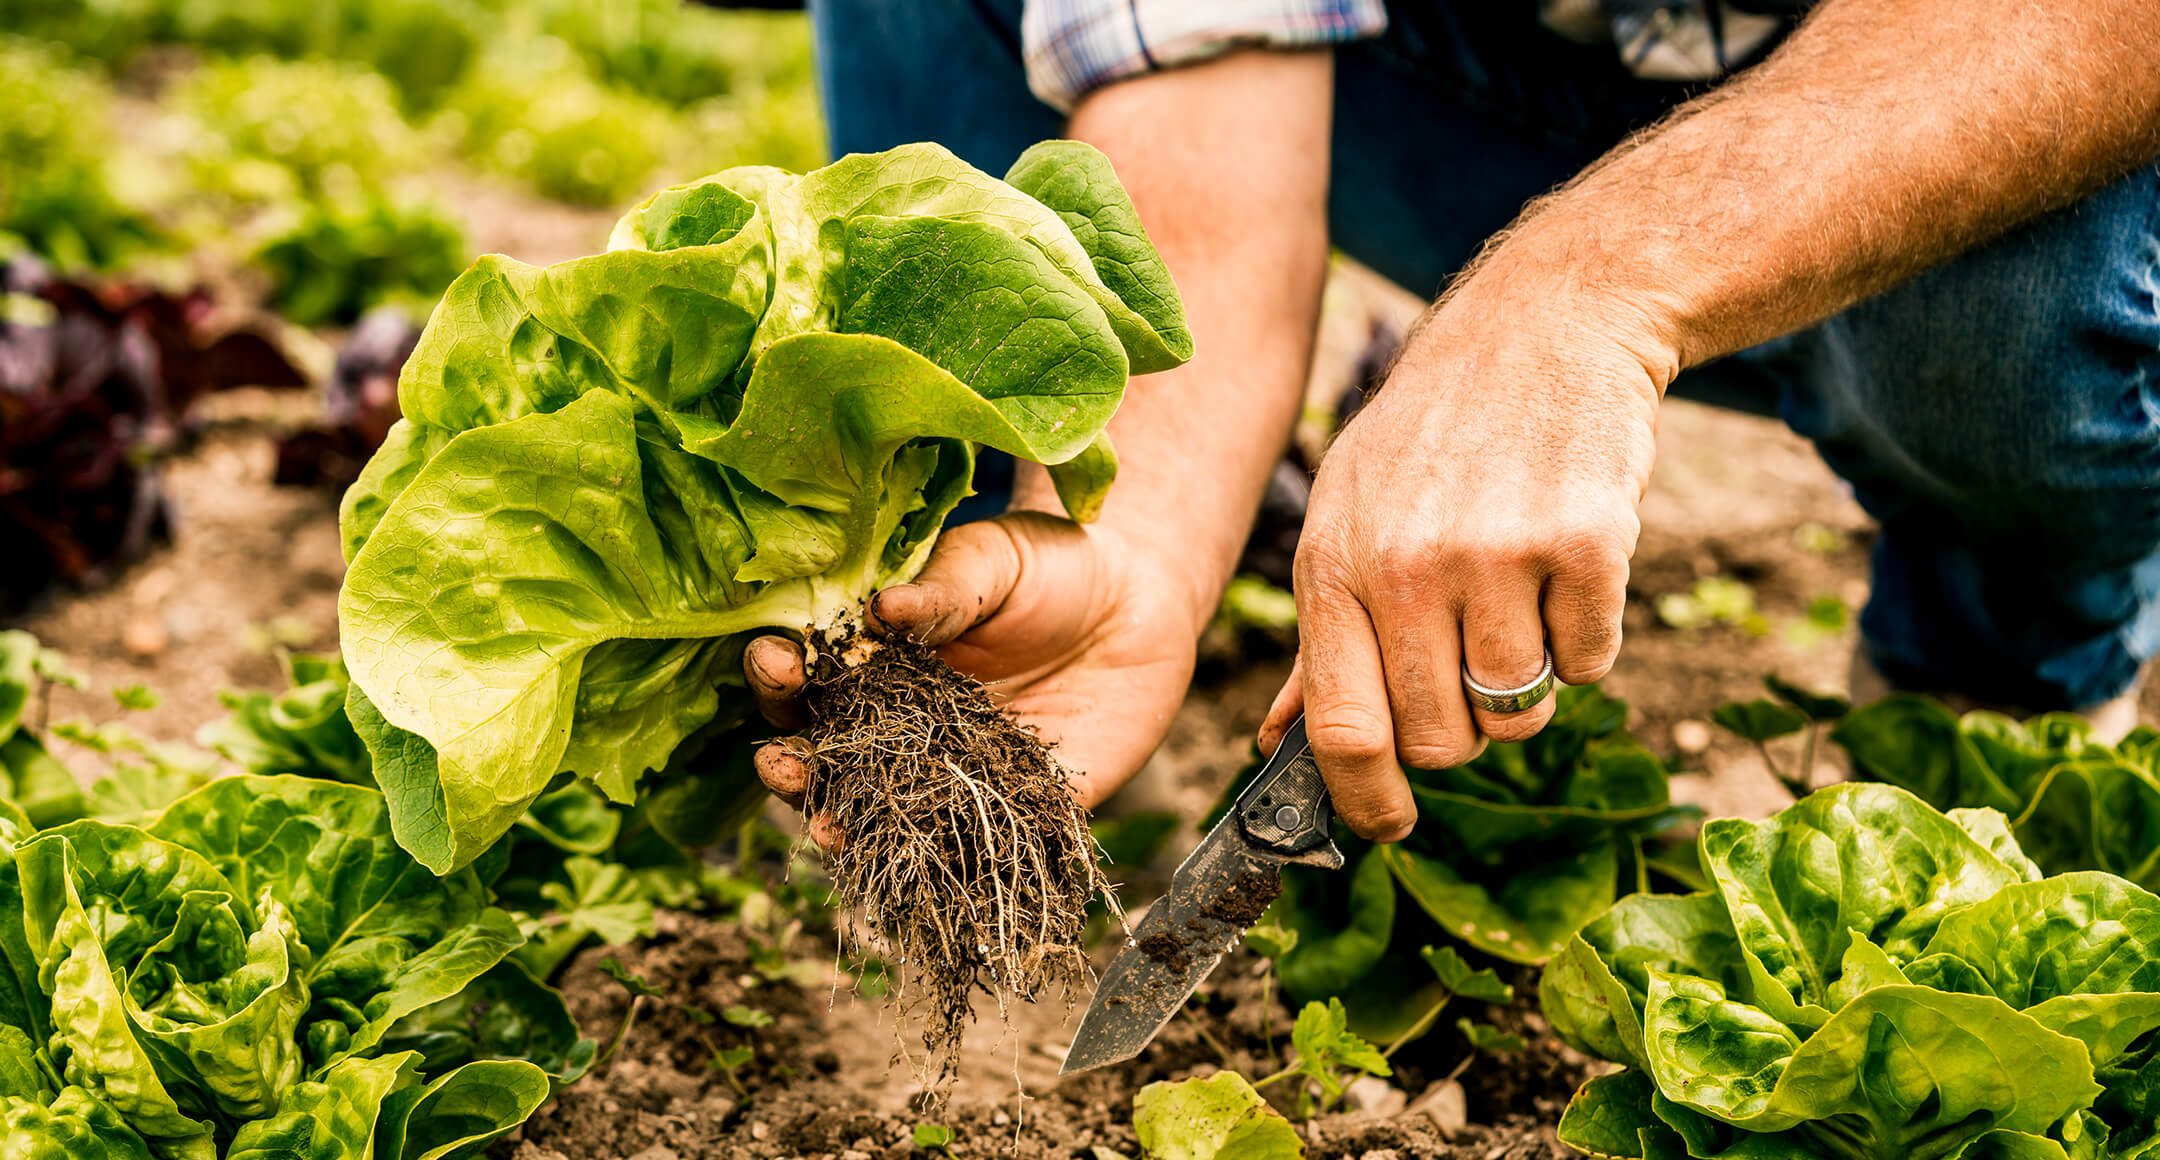 hands cutting a fresh head of lettuce from the soil on a farm.